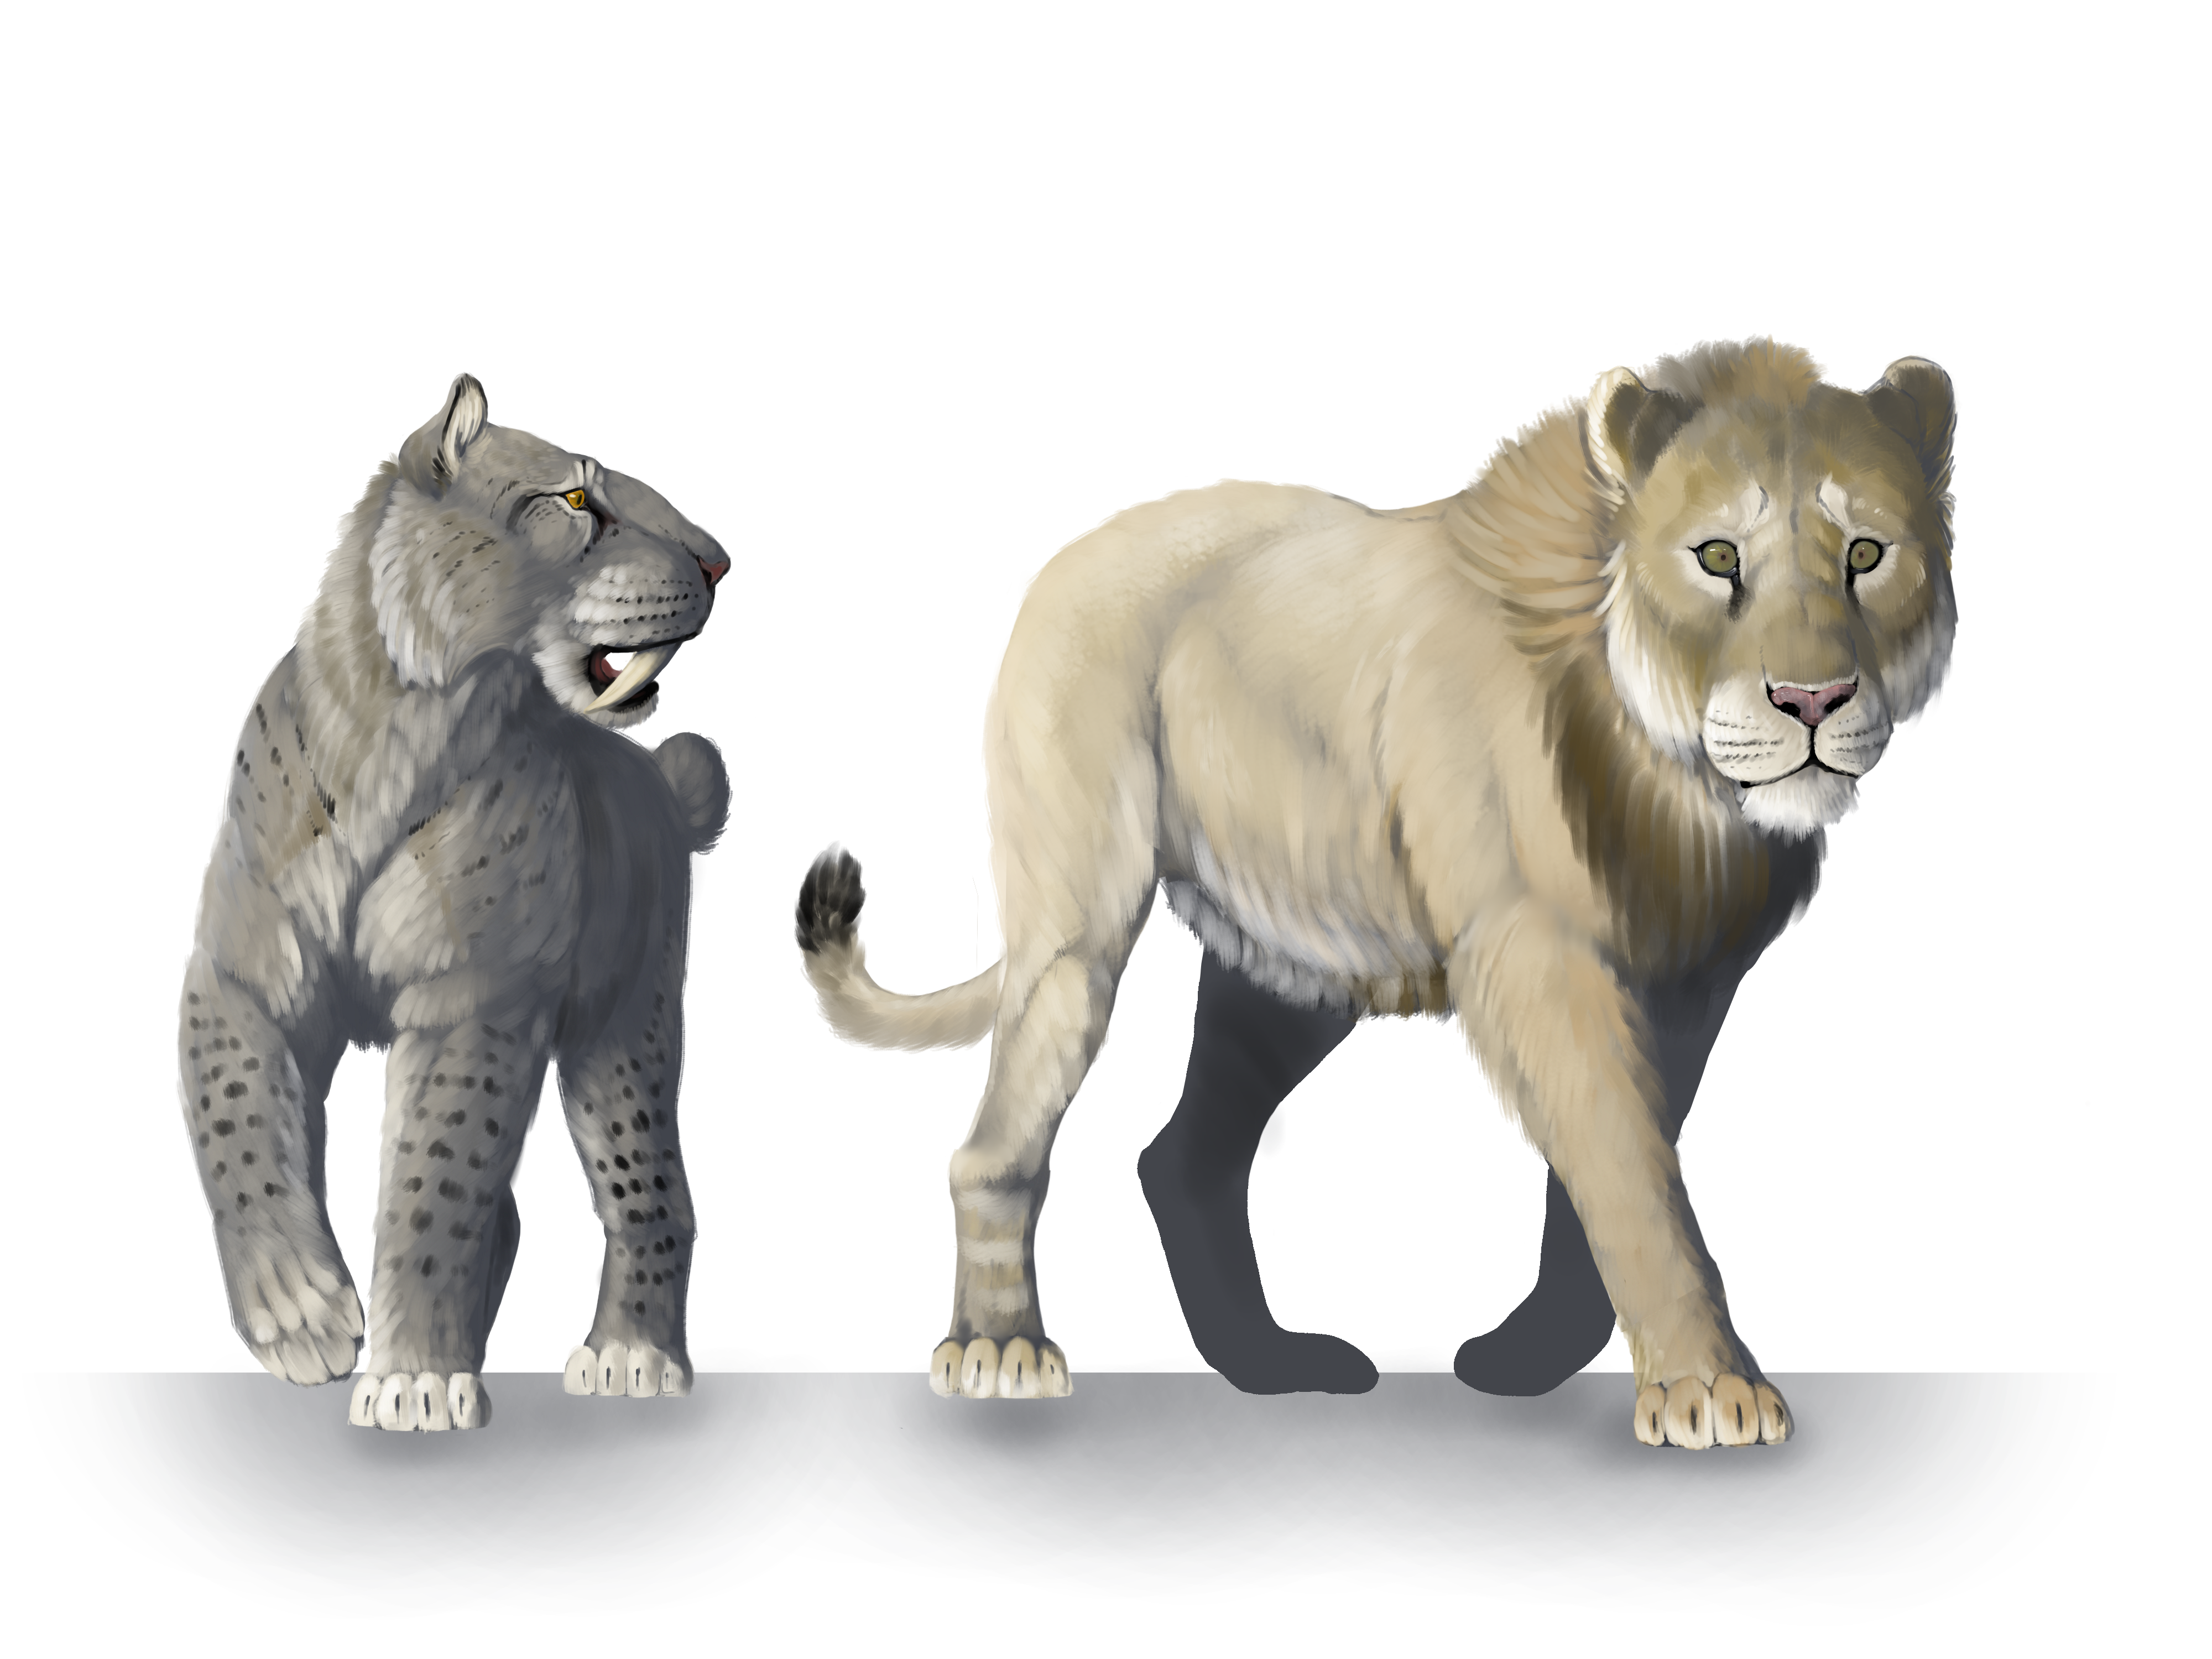 dire wolf size compared to lion